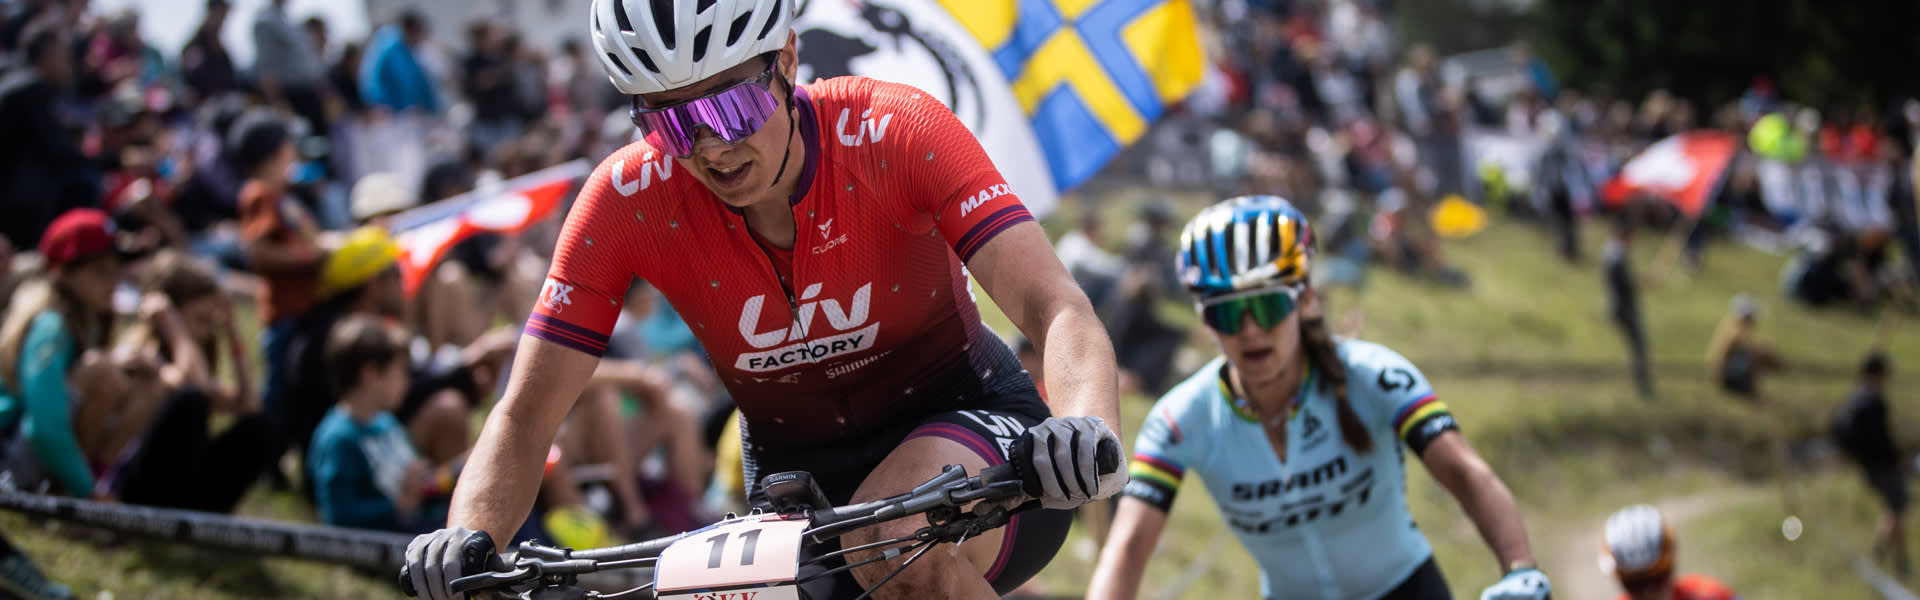 Liv Factory Racing | Liv Cycling Official site